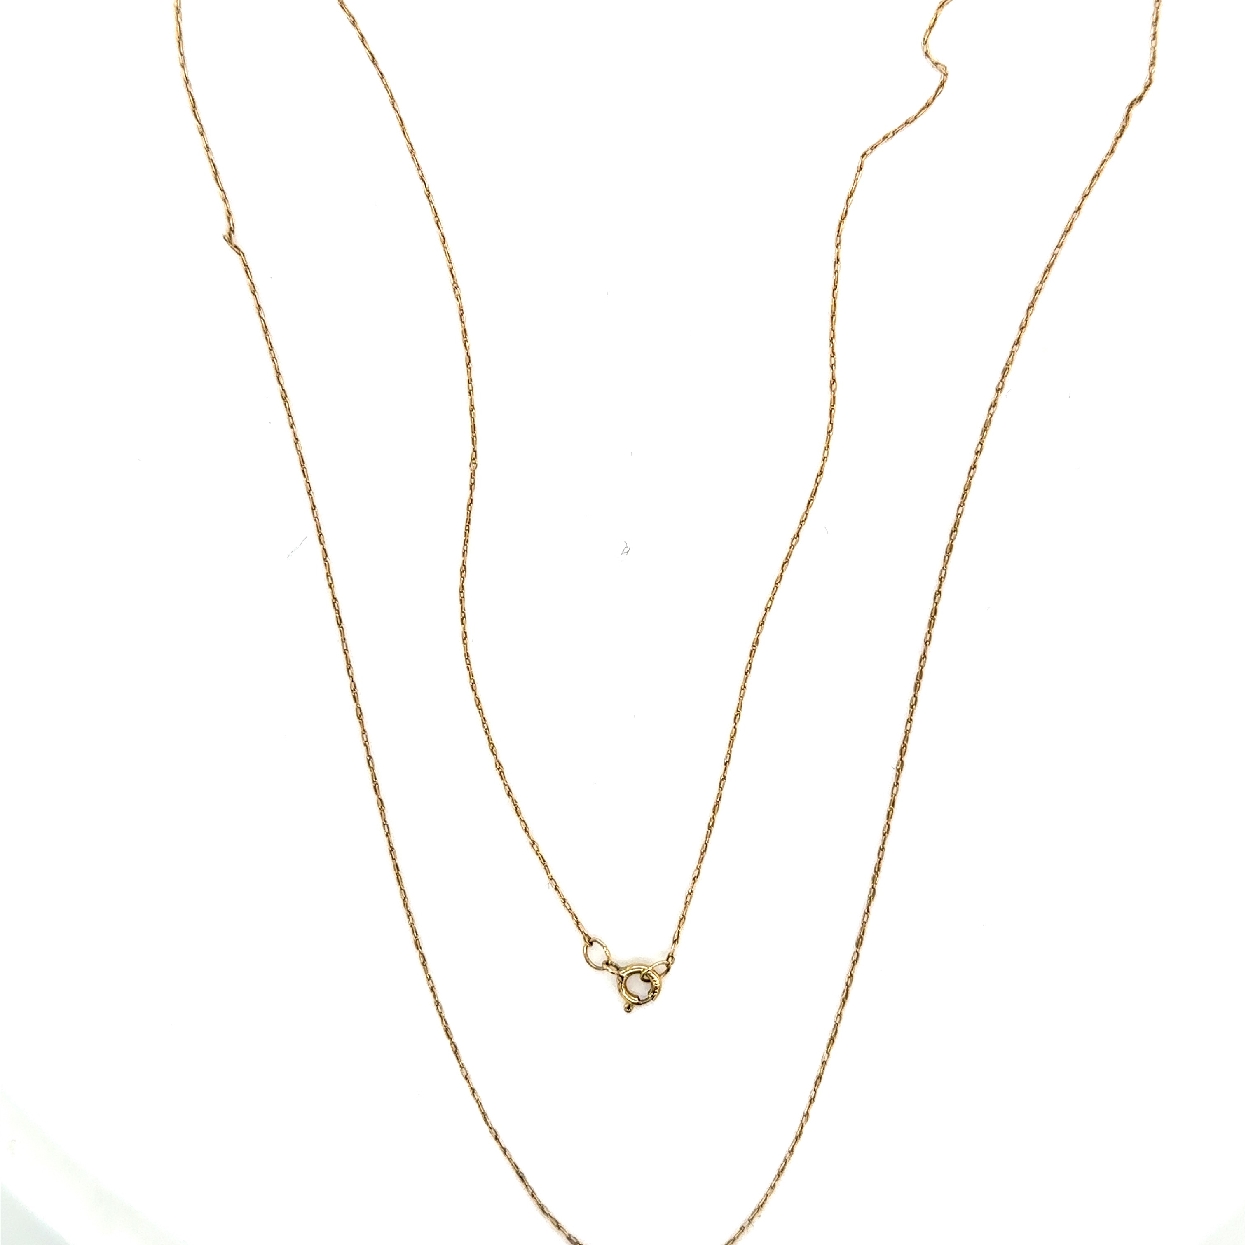 10K Yellow Gold Chain

20 Inches